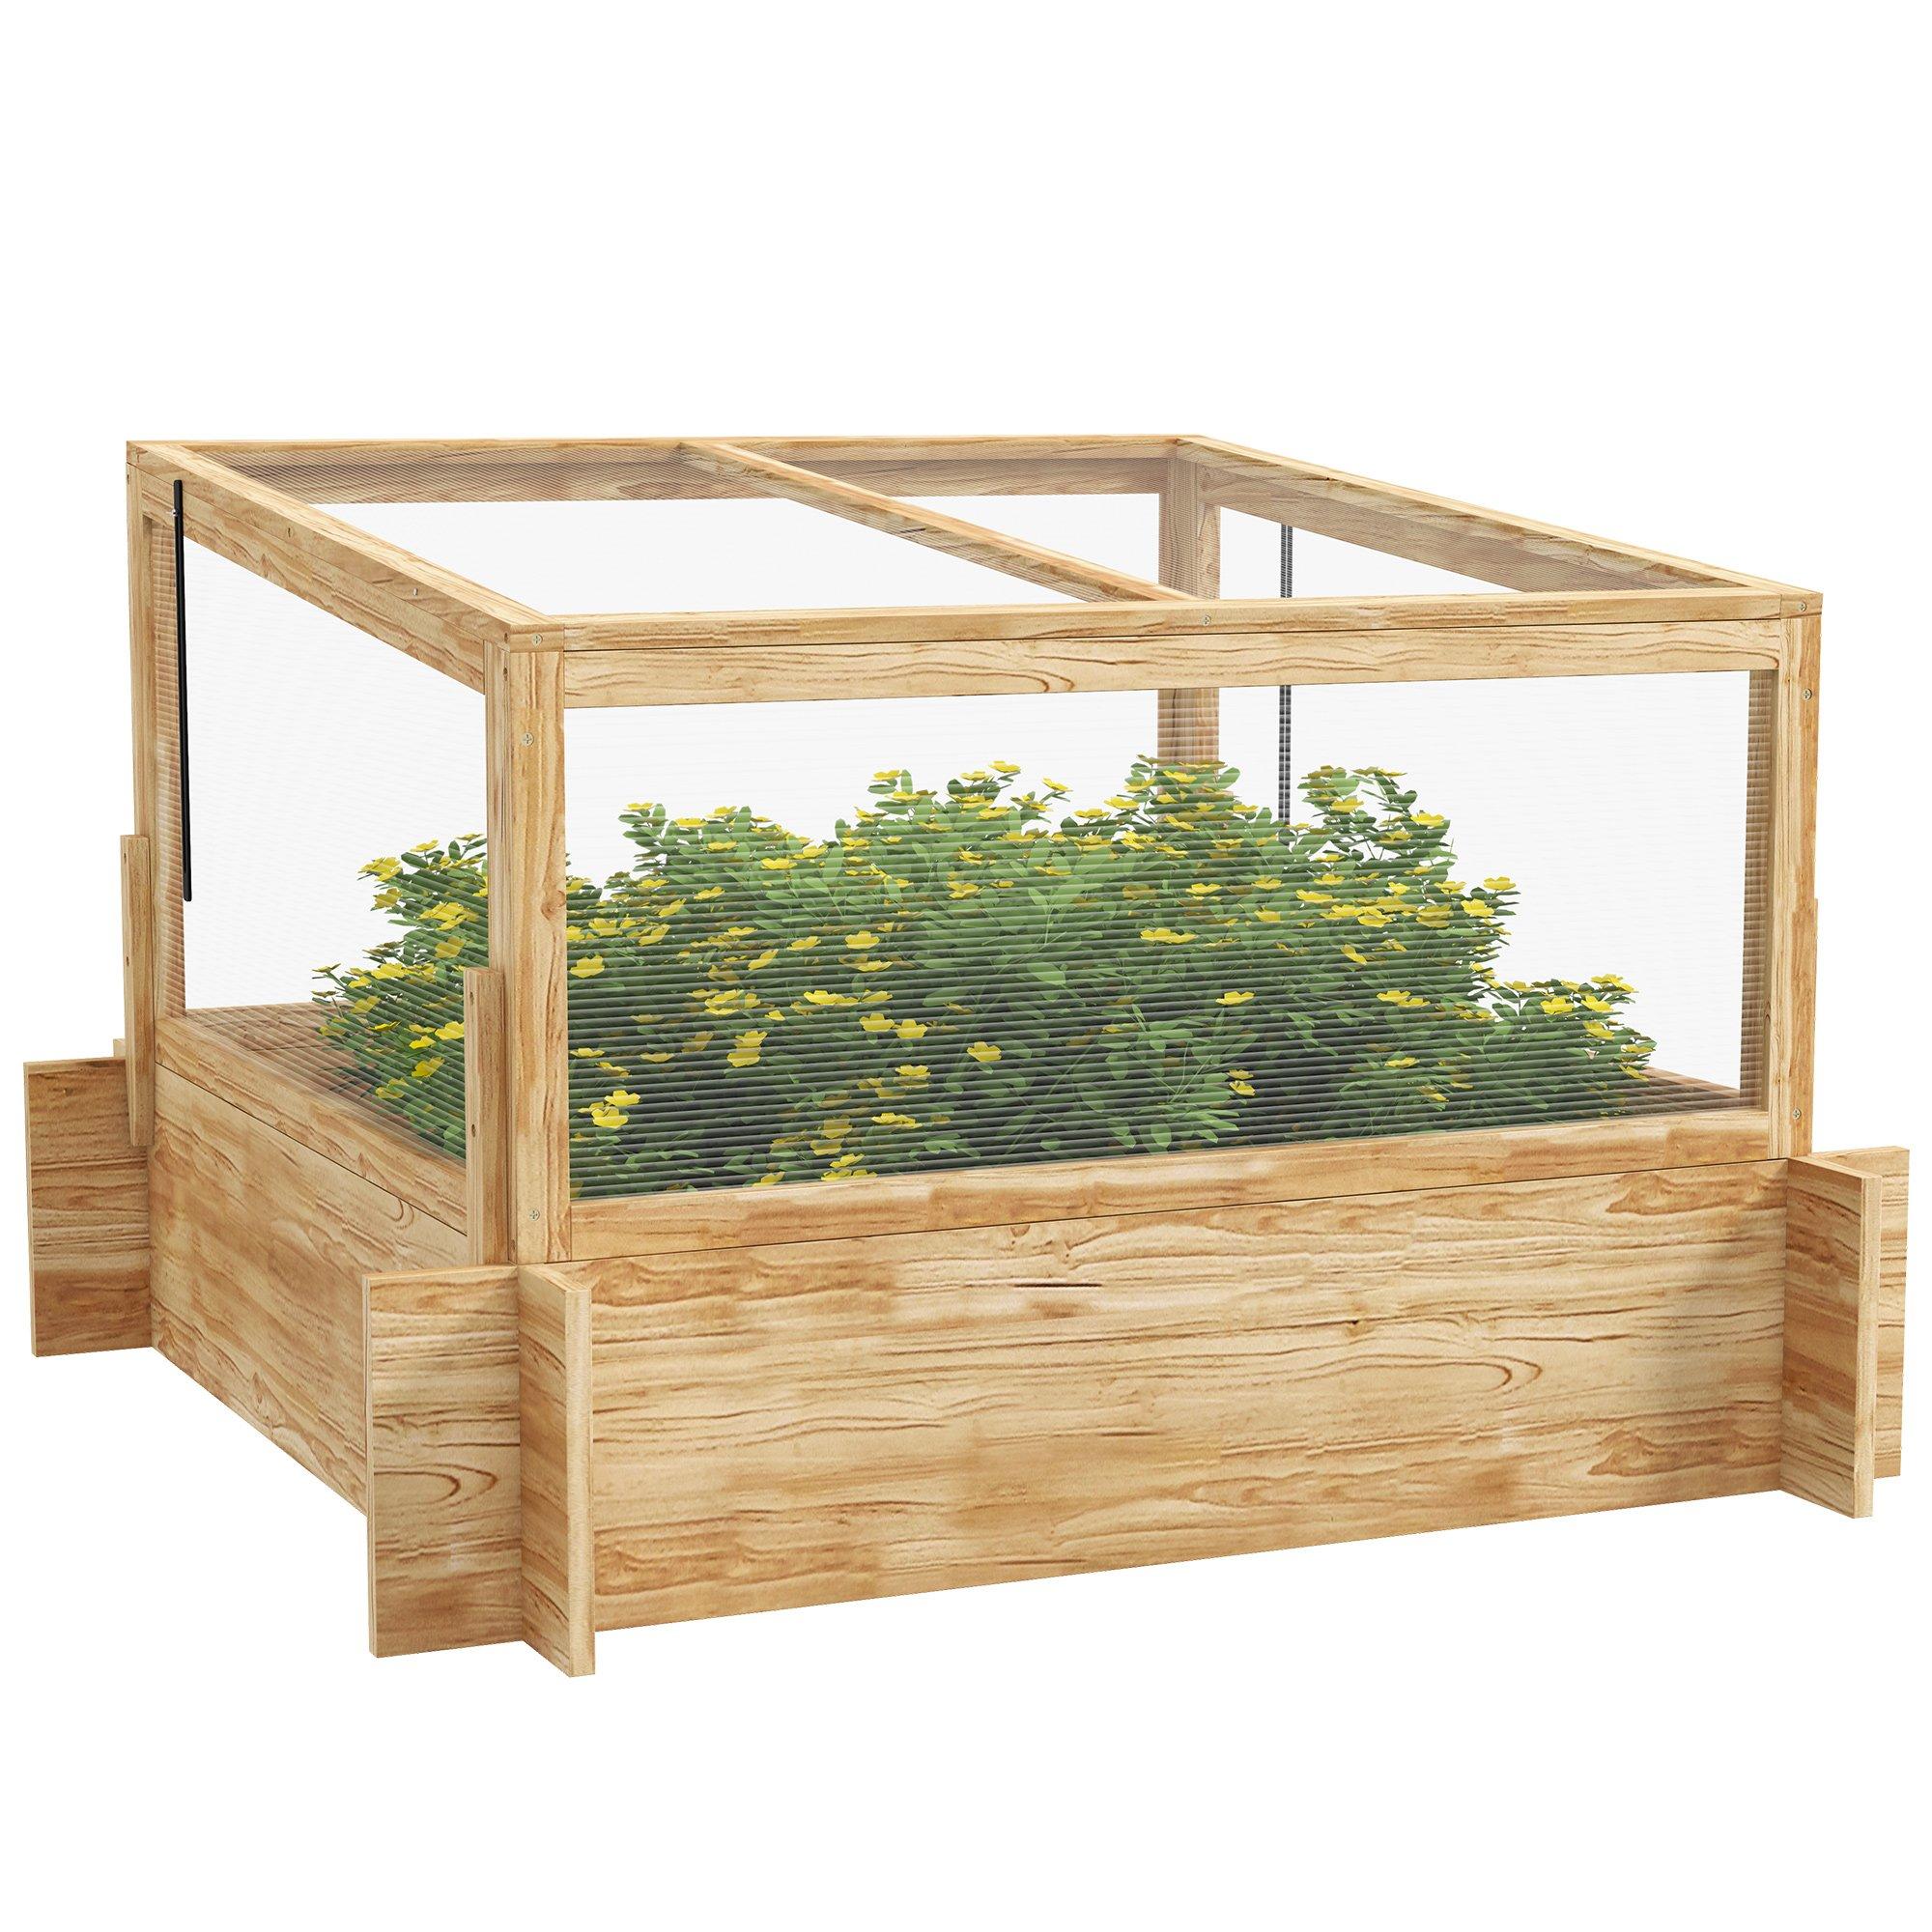 Outdoor Raised Garden Bed with Cold Frame Greenhouse and Openable Top